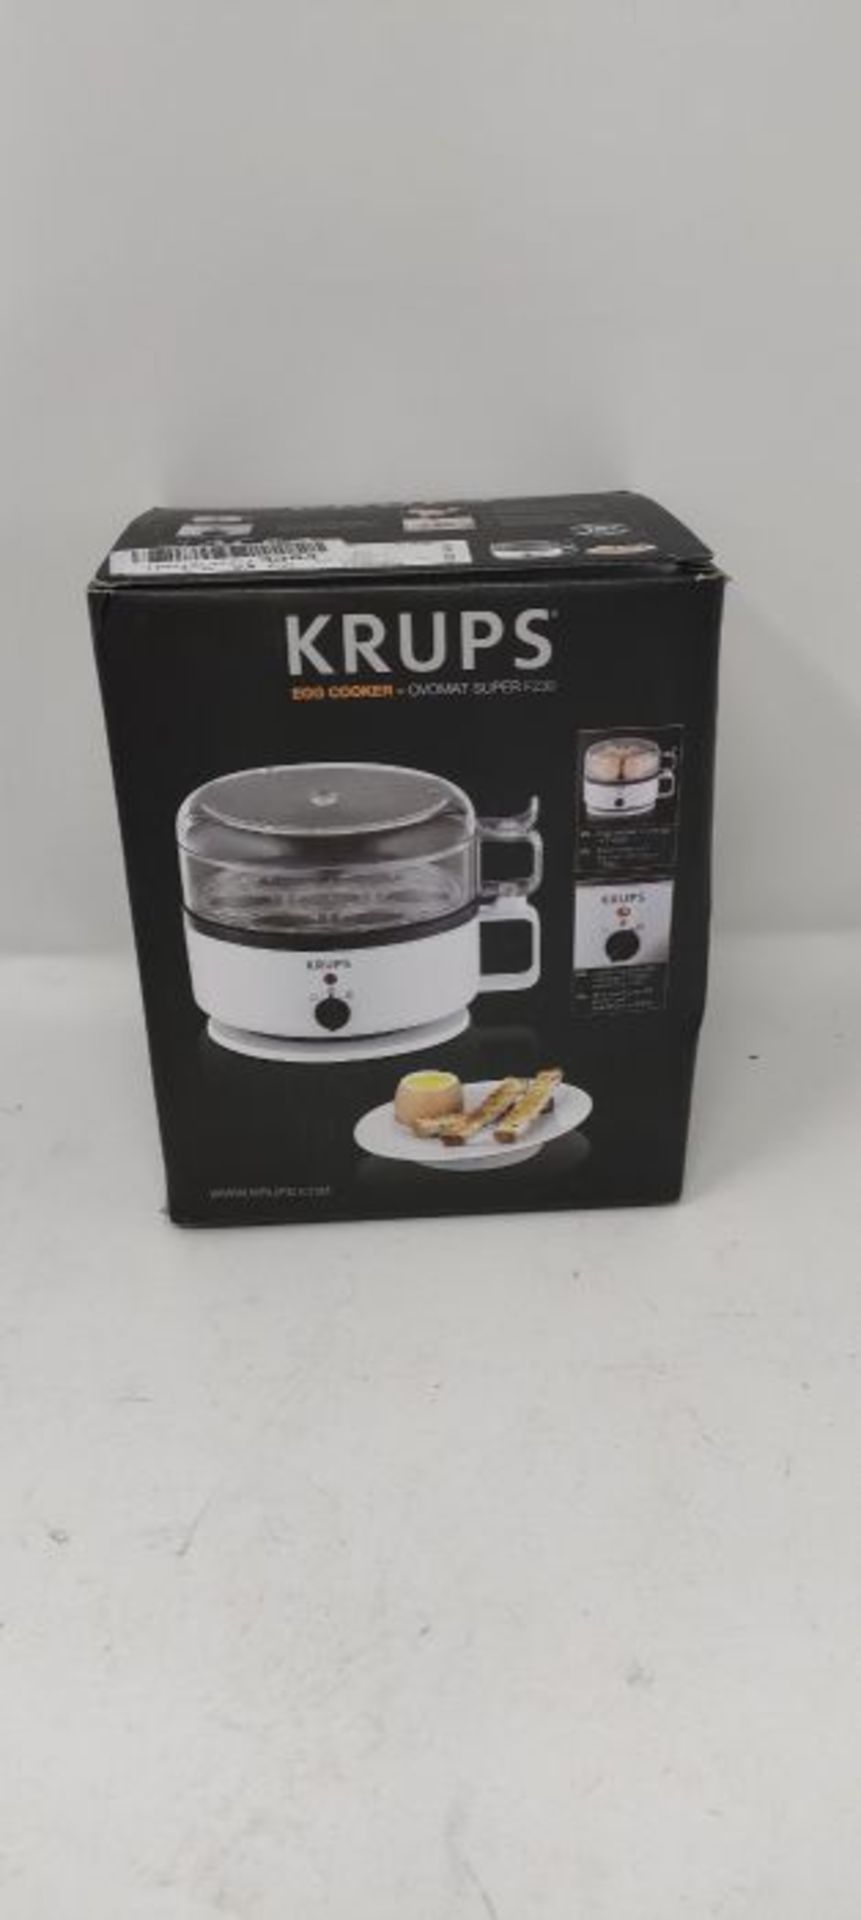 Krups F 230 70- egg cookers (18.500 cm, 18.500 cm, 14.500 cm) - Image 2 of 3